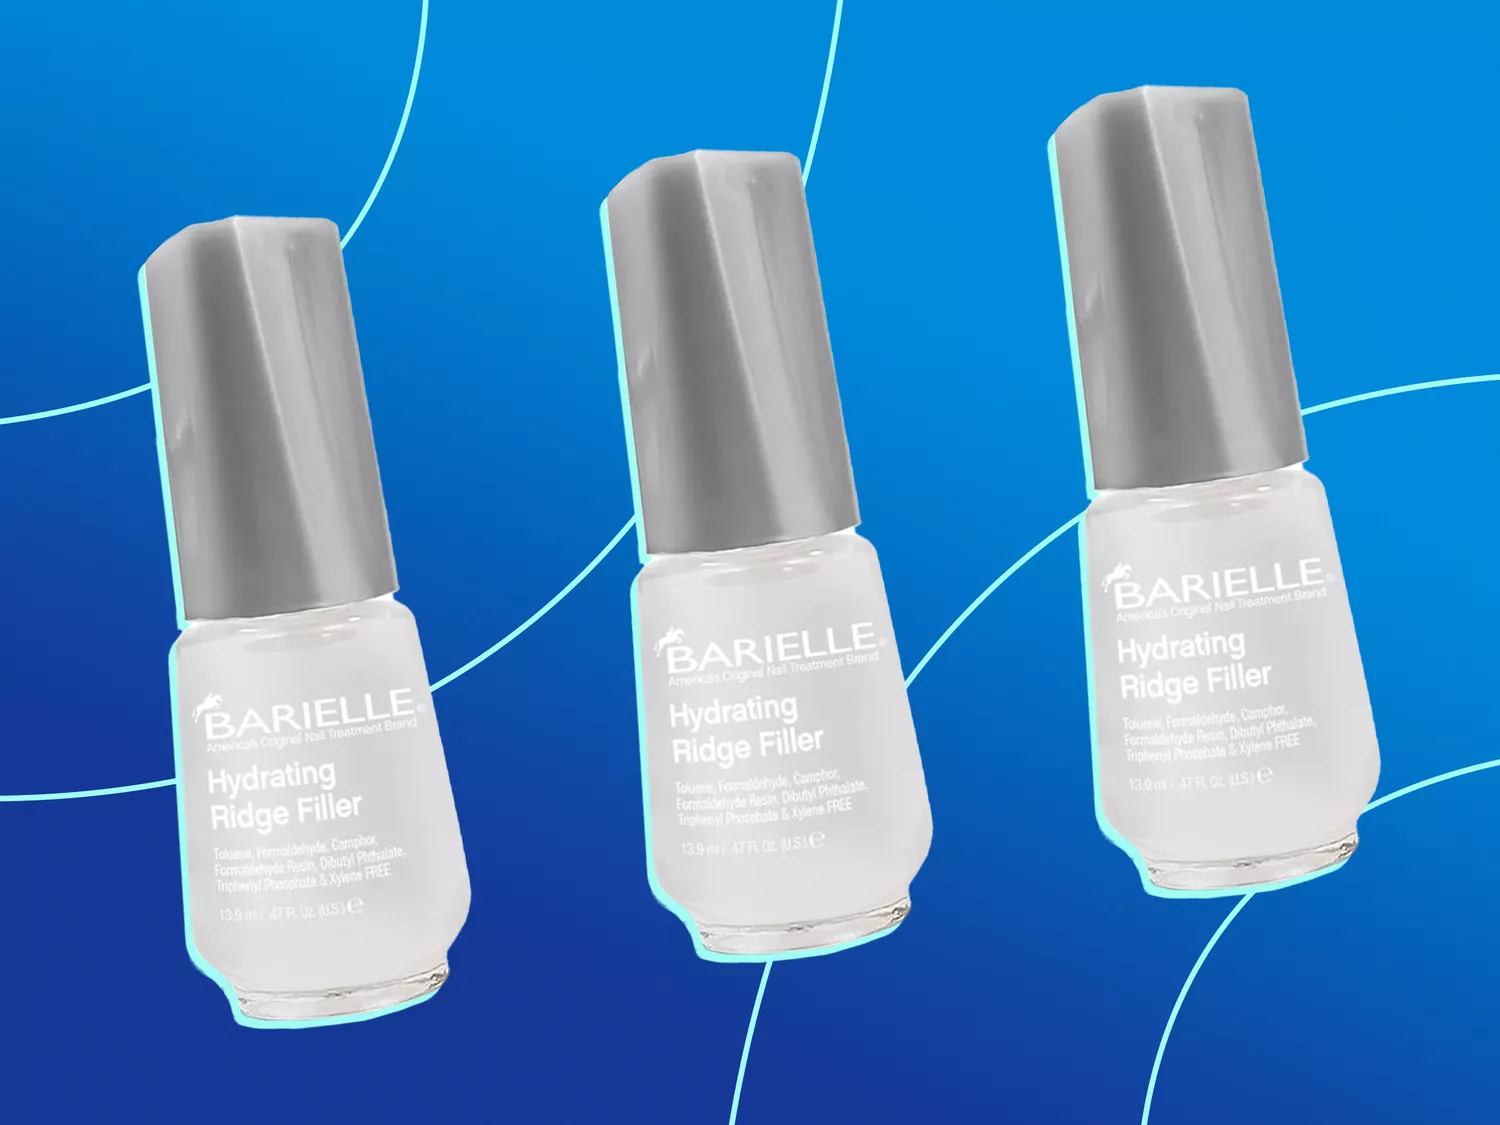 Shoppers With Brittle Nails Say Just 1 Coat of This $10 Treatment Makes Nails “Stronger and Healthier”